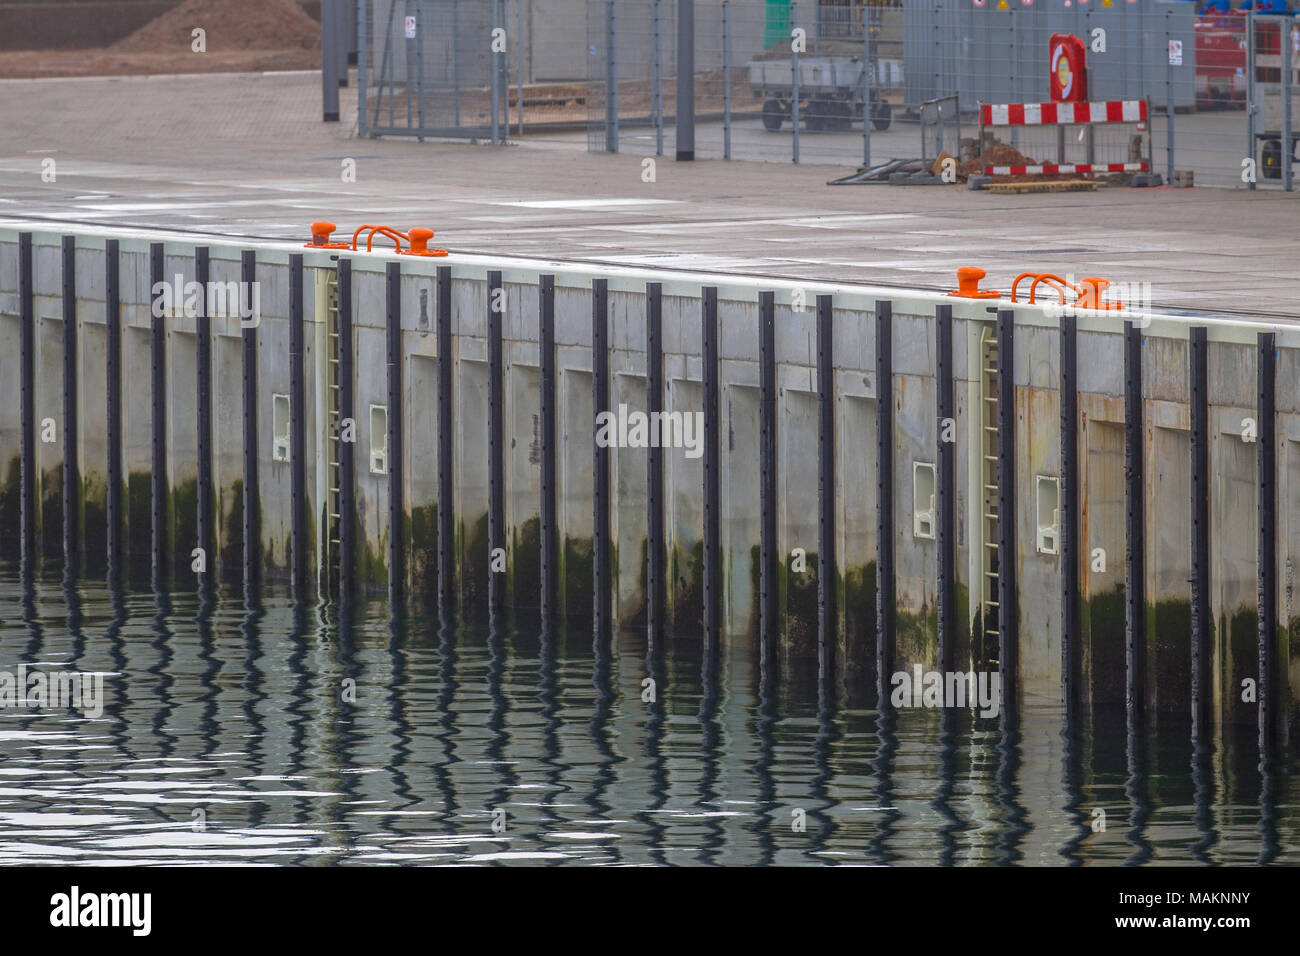 Detail of new modern quay of concrete with rubber bumbers Stock Photo